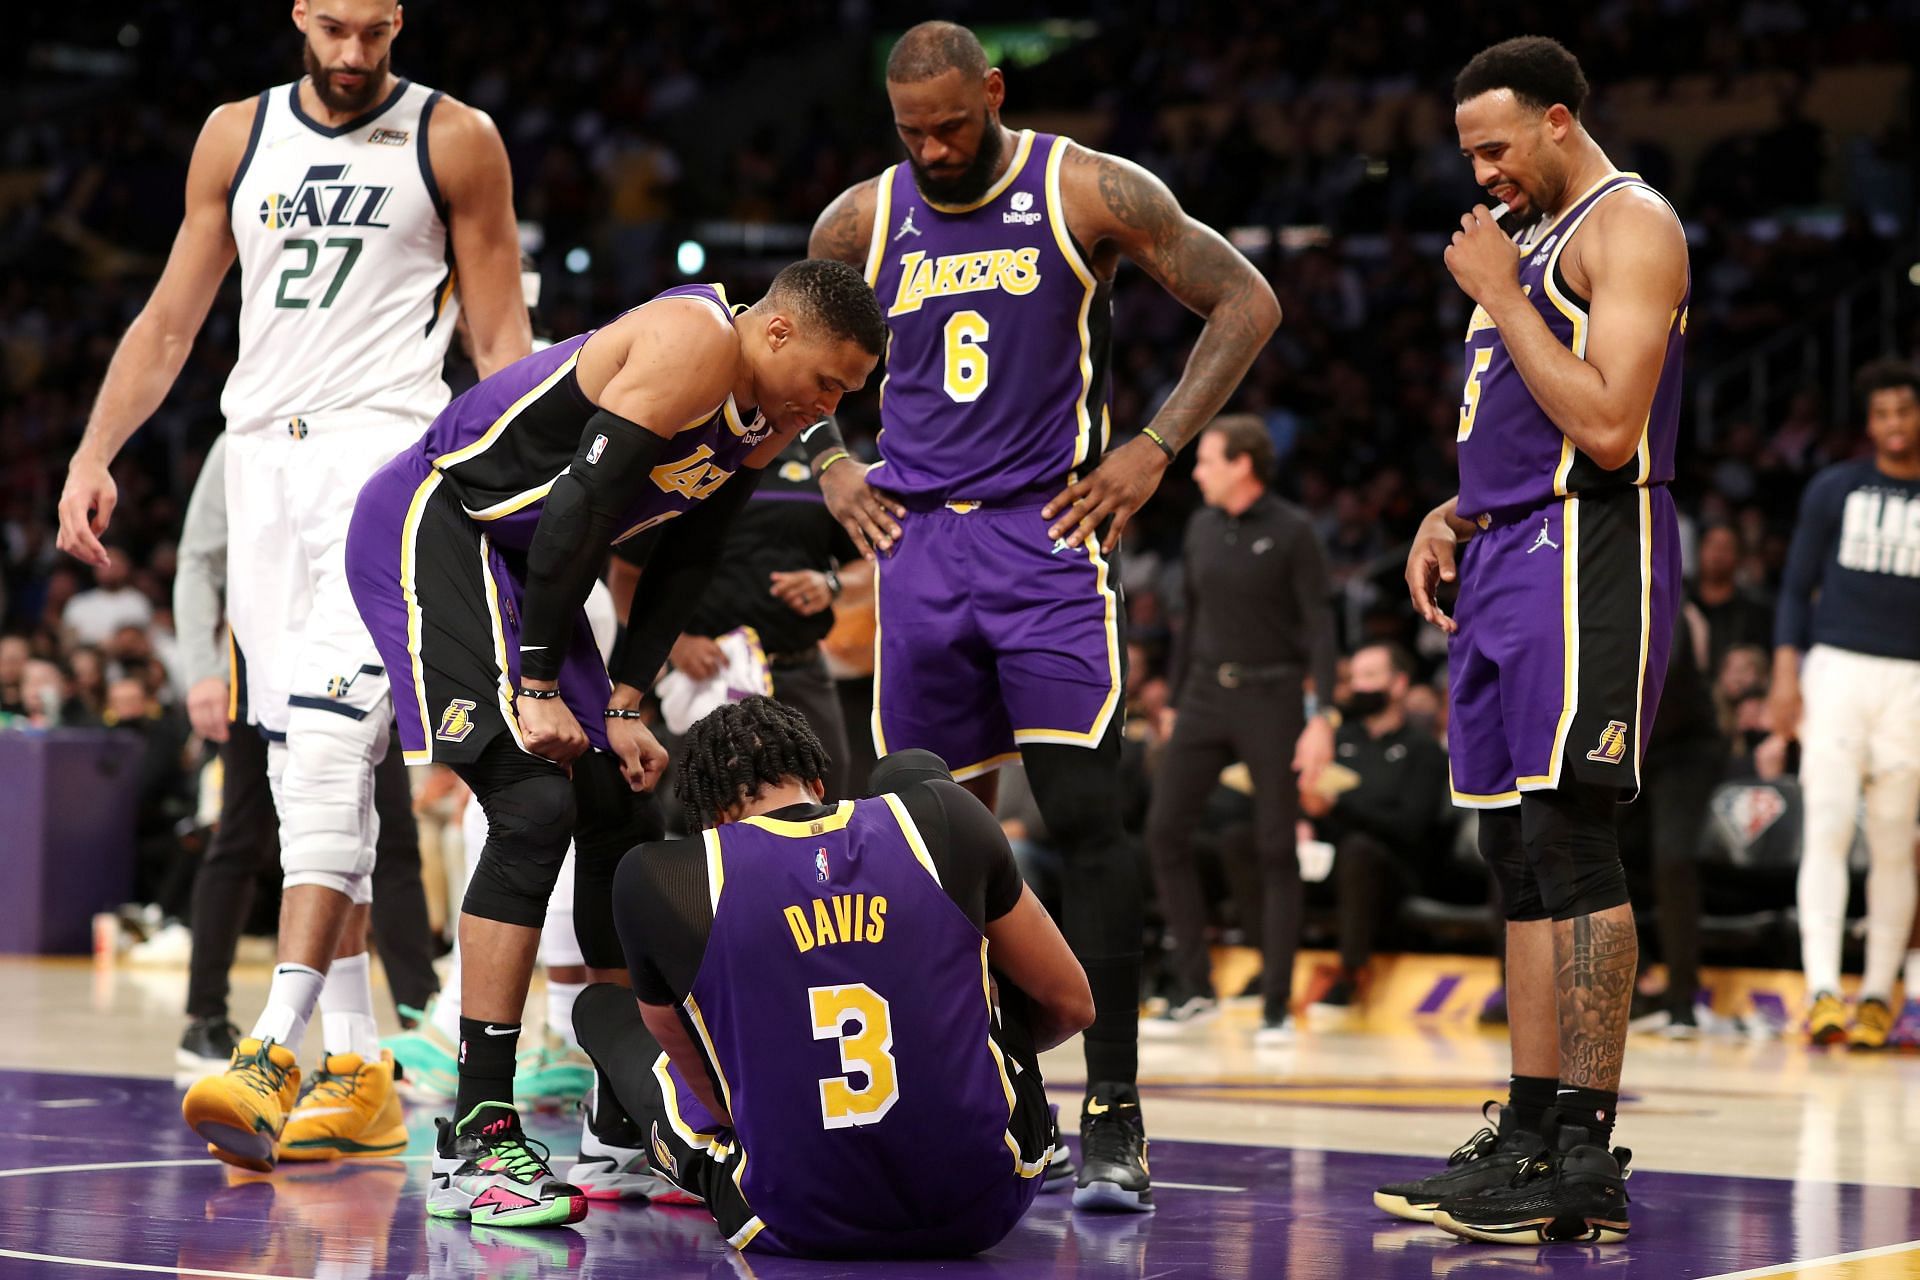 Russell Westbrook (left), LeBron James (6) and Talen Horton-Tucker (right) of the LA Lakers check on teammate Anthony Davis after an injury during the second quarter against the Utah Jazz on Feb. 16, 2022, in Los Angeles, California.